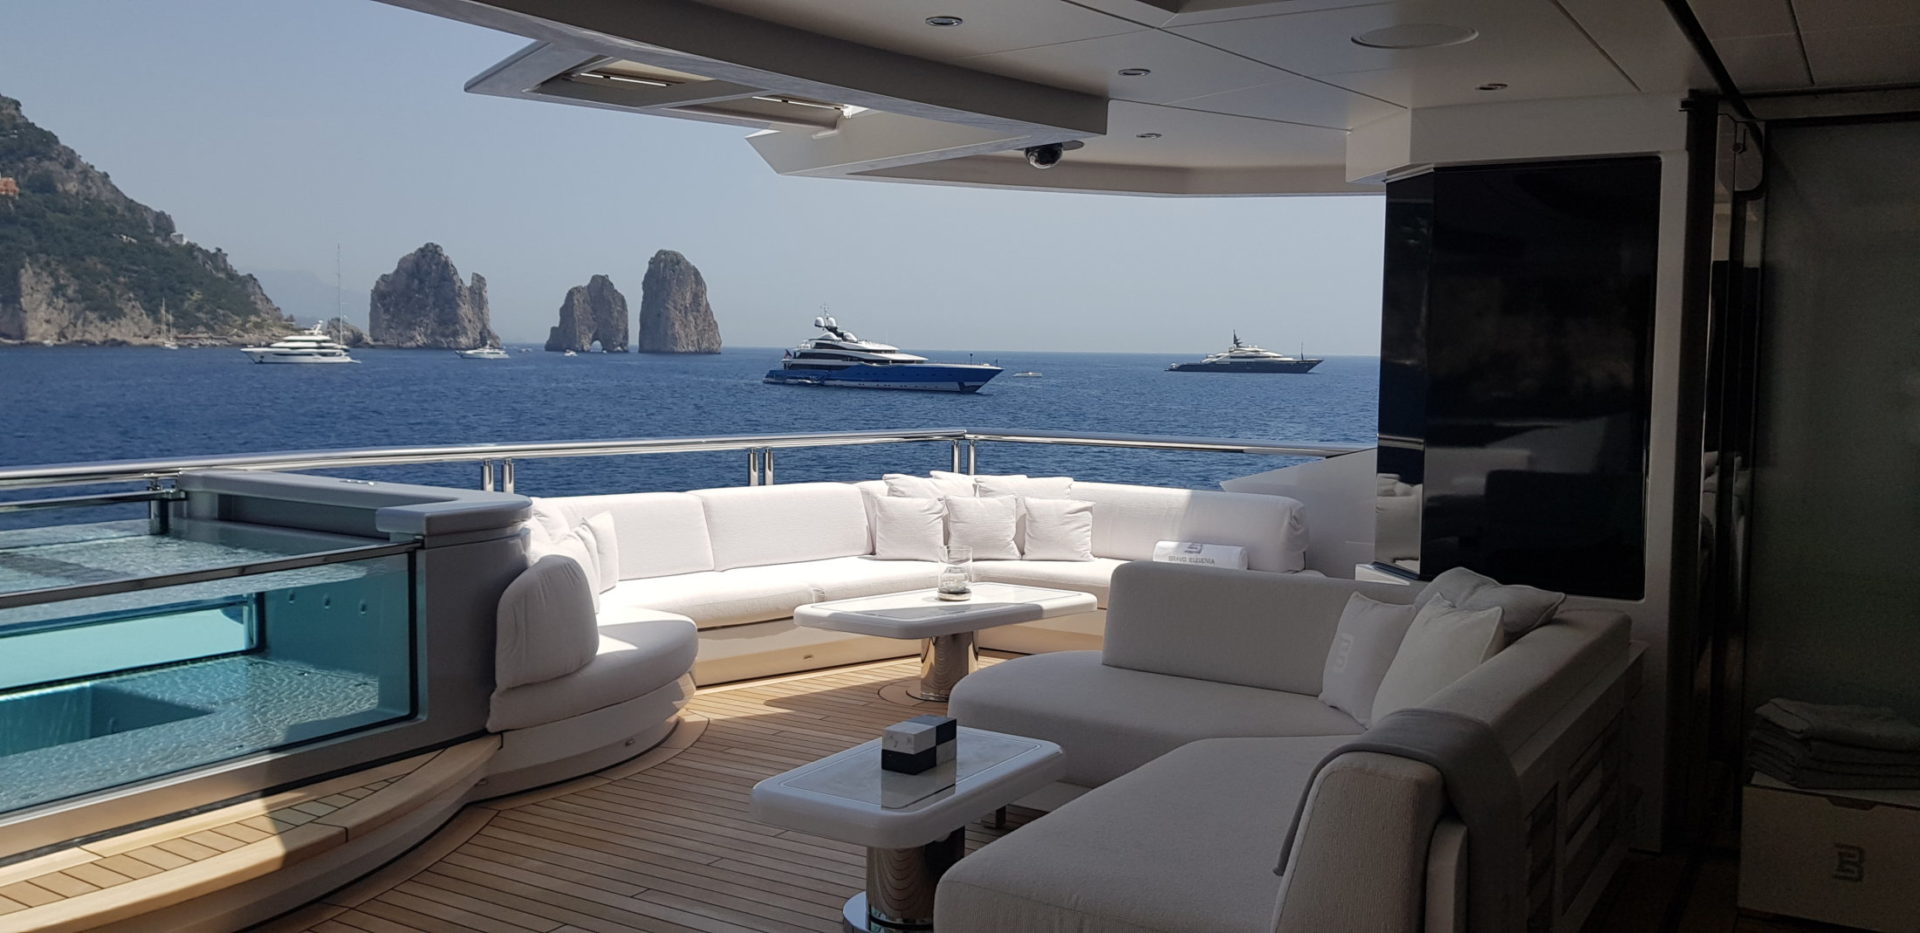 View from superyacht crew recruitment